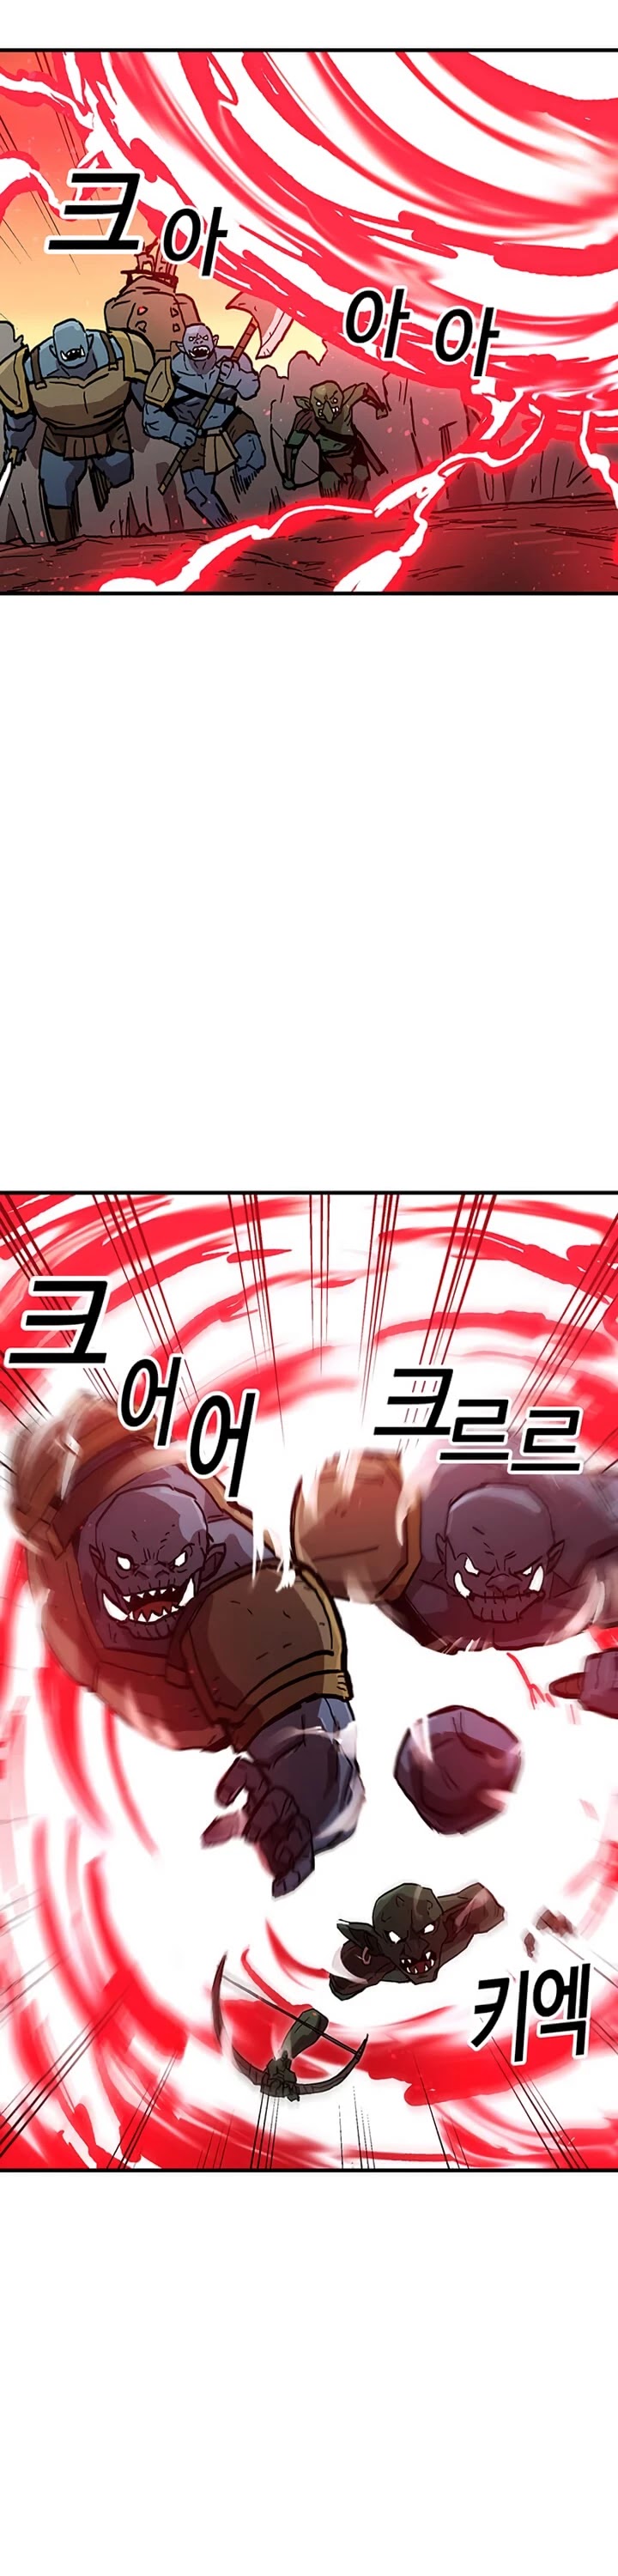 Solo Bug Player, Solo Bug Player manga, Solo Bug Player manga online, read Solo Bug Player, read Bug Player, Bug Player manga, Bug Player manga online, read Bug Player manga, Solo Bug Player manhwa, Solo Bug Player manhwa online, Bug Player manhwa, Bug Player manhwa online, read Bug Player manhwa, bug player novel wiki, solo bug player 11, solo bug player 17, bug player raw, bug player chapter 8, bug player chapter 14, bug player novelupdates, bug player chapter 9, bug player chapter 15, bug player chapter 20, bug player 21, bug player 14, bugbear player race 5e, bug solo player, bug solo player manga, bug head emperor player download, big w dvd player, bug freebox delta player, bug player devialet, bug be player, bug flash player dofus, big multiplayer game, bug player map, bug player neox, bug player pop, bug player pick fifa 20, bug player pick fifa 21, bug player pt br, bug player pick, bug player pop free, bug player novel pdf, bug player freebox pop, bug player novela ligera pdf, bug quicktime player mac, is quicktime player safe for mac, how do i get quicktime player on my mac, how do i get quicktime player to work on my mac, how to hide quicktime player control mac, can't play quicktime on mac